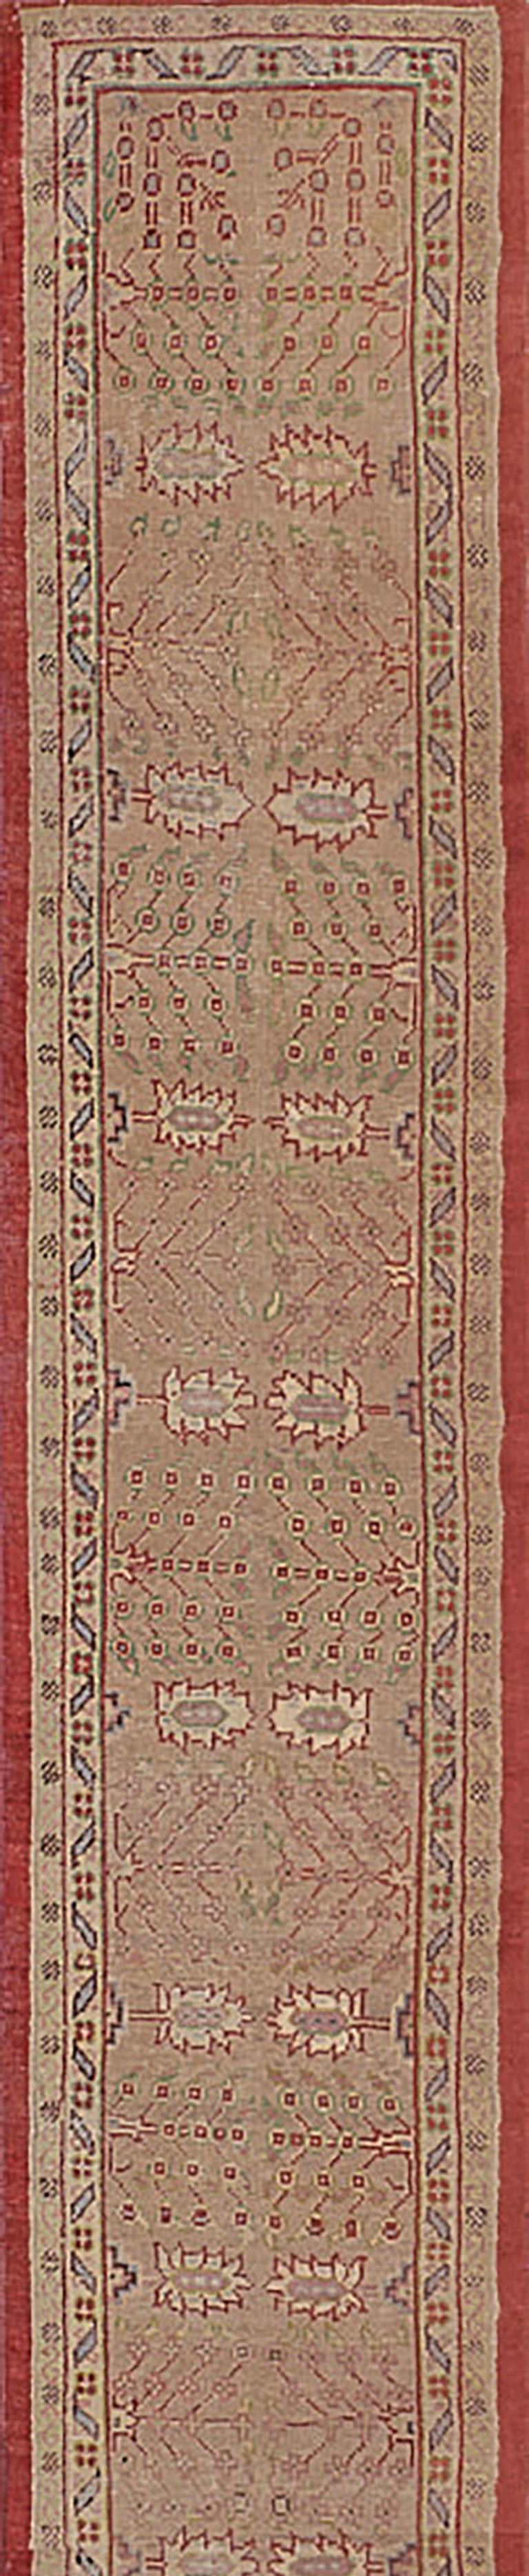 This antique, circa 1900, Oushak rug has a soft terracotta-pink field with bold paired sandy-yellow trees at each side alternating with paired vases issuing angular floral sprays, in a narrow sandy-yellow border of shaded green and tomato-red